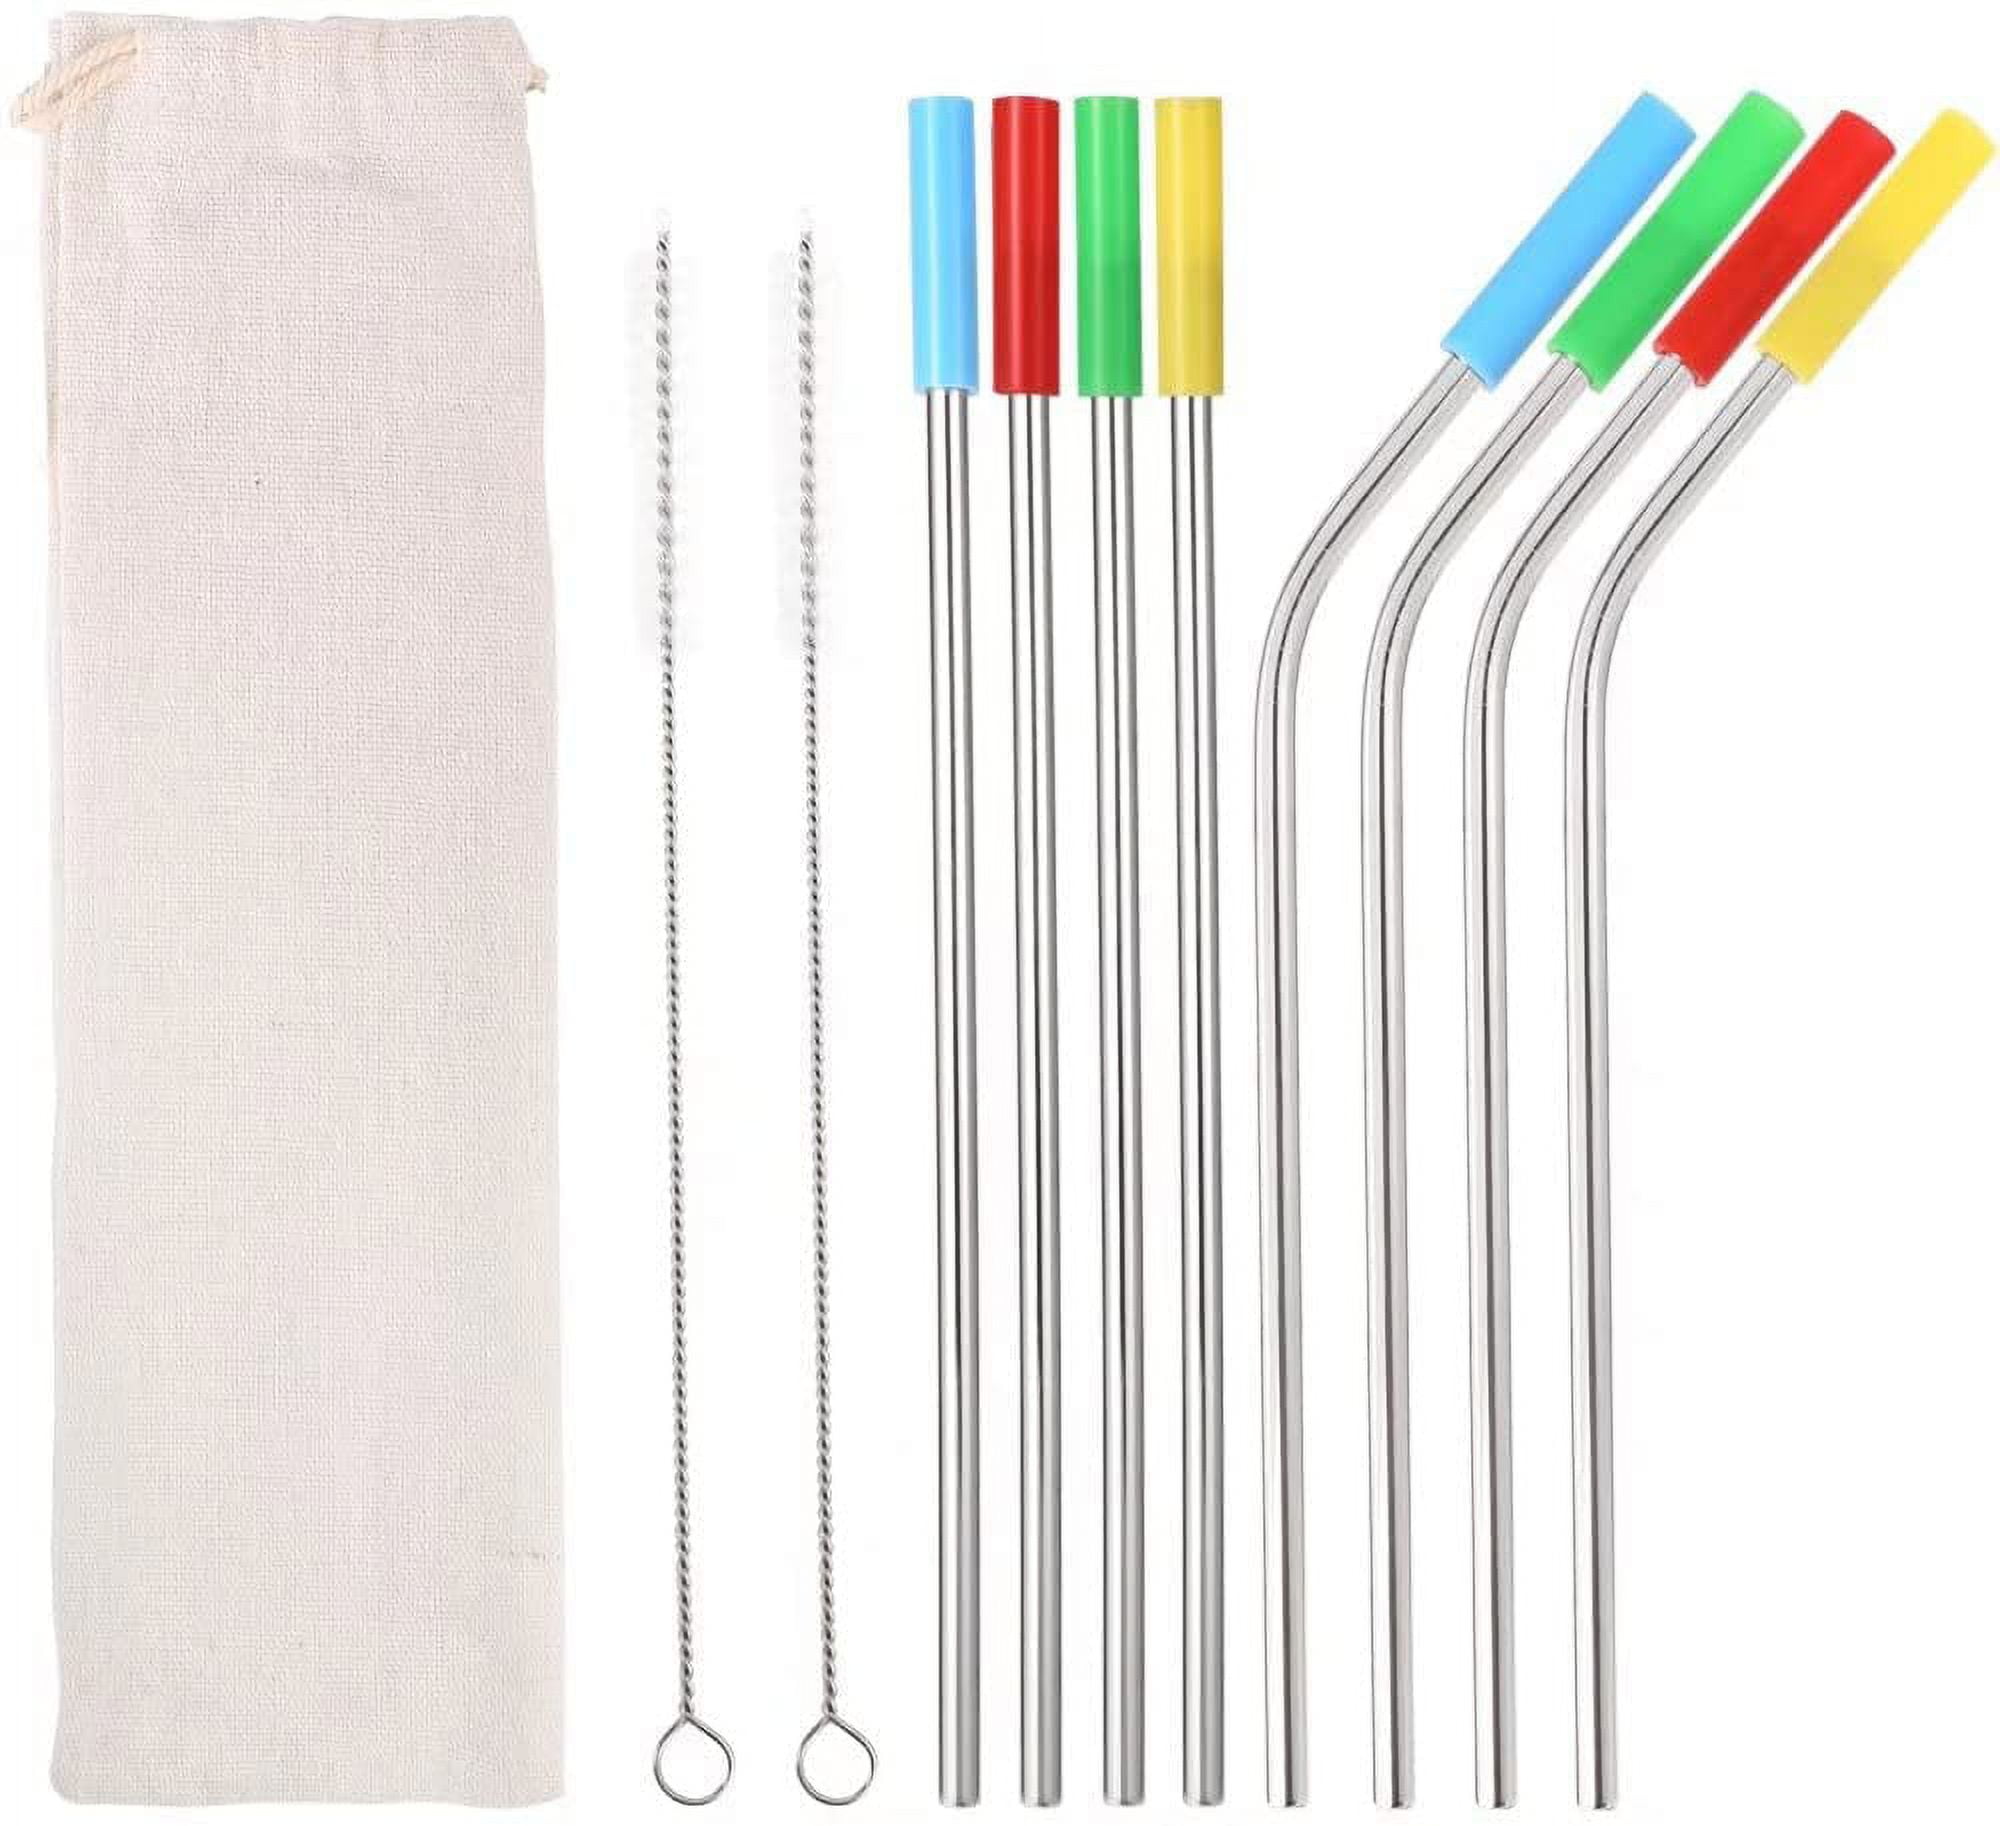 Ecowaare 8pcs Stainless Steel Straws with 2 Cleaning Brushes Silicon C